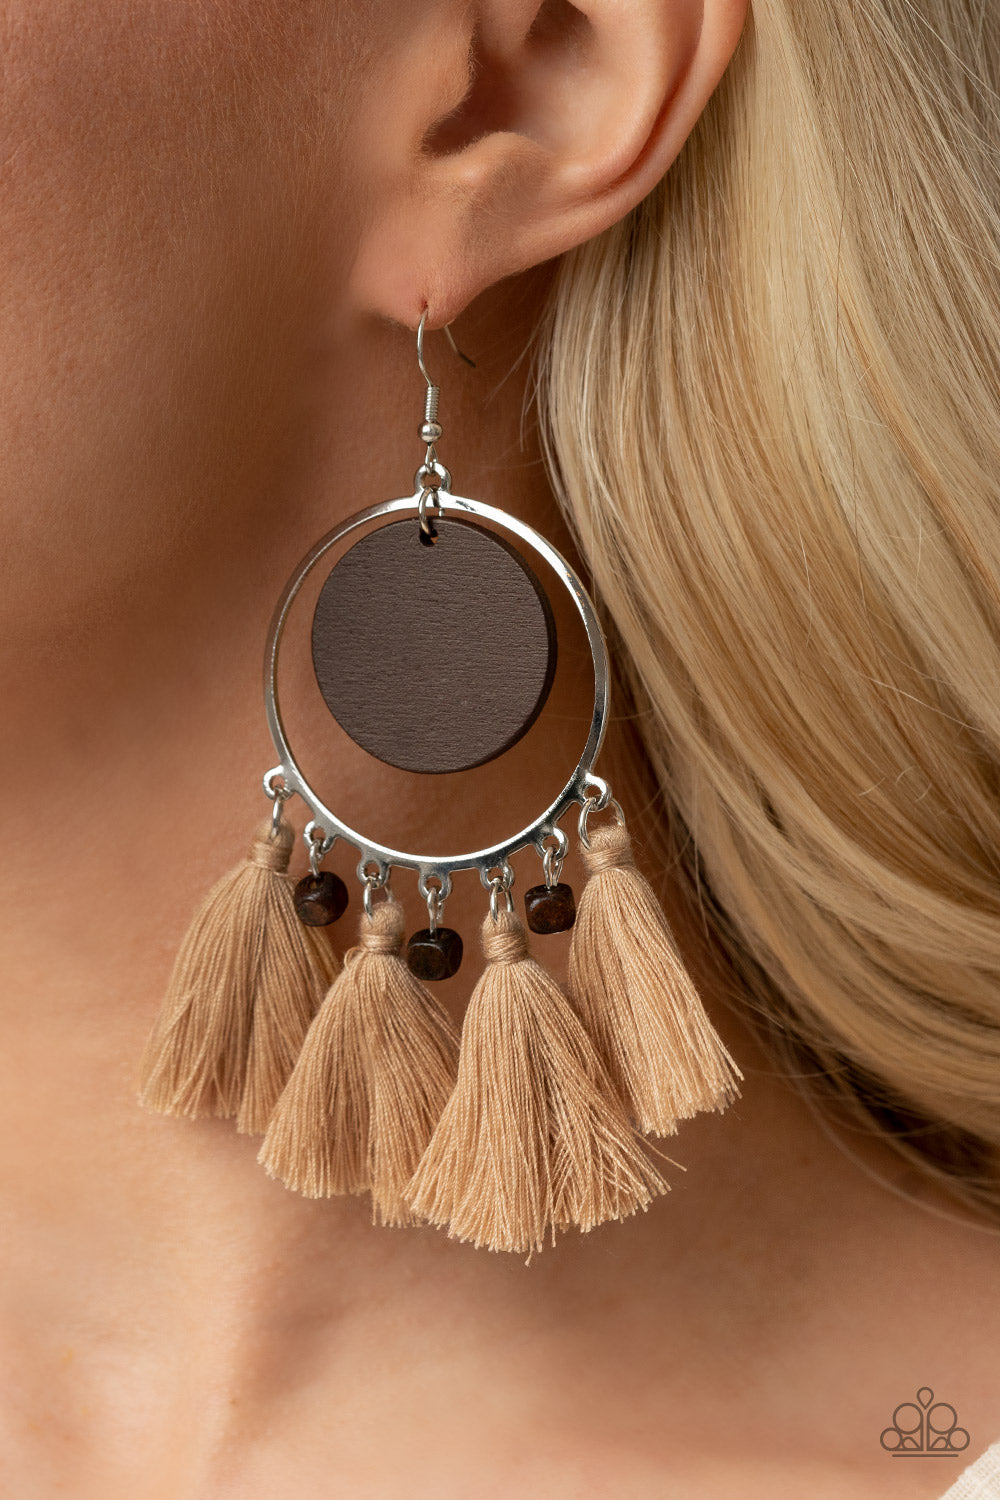 Paparazzi Accessories Yacht Bait - Brown Earrings wooden disc swings from the top of a shiny silver hoop that is adorned in dainty wooden cube beads and Desert Mist threaded tassels, creating an earthy fringe. Earring attaches to a standard fishhook fitting.  Sold as one pair of earrings.  Paparazzi Jewelry is lead and nickel free so it's perfect for sensitive skin too!